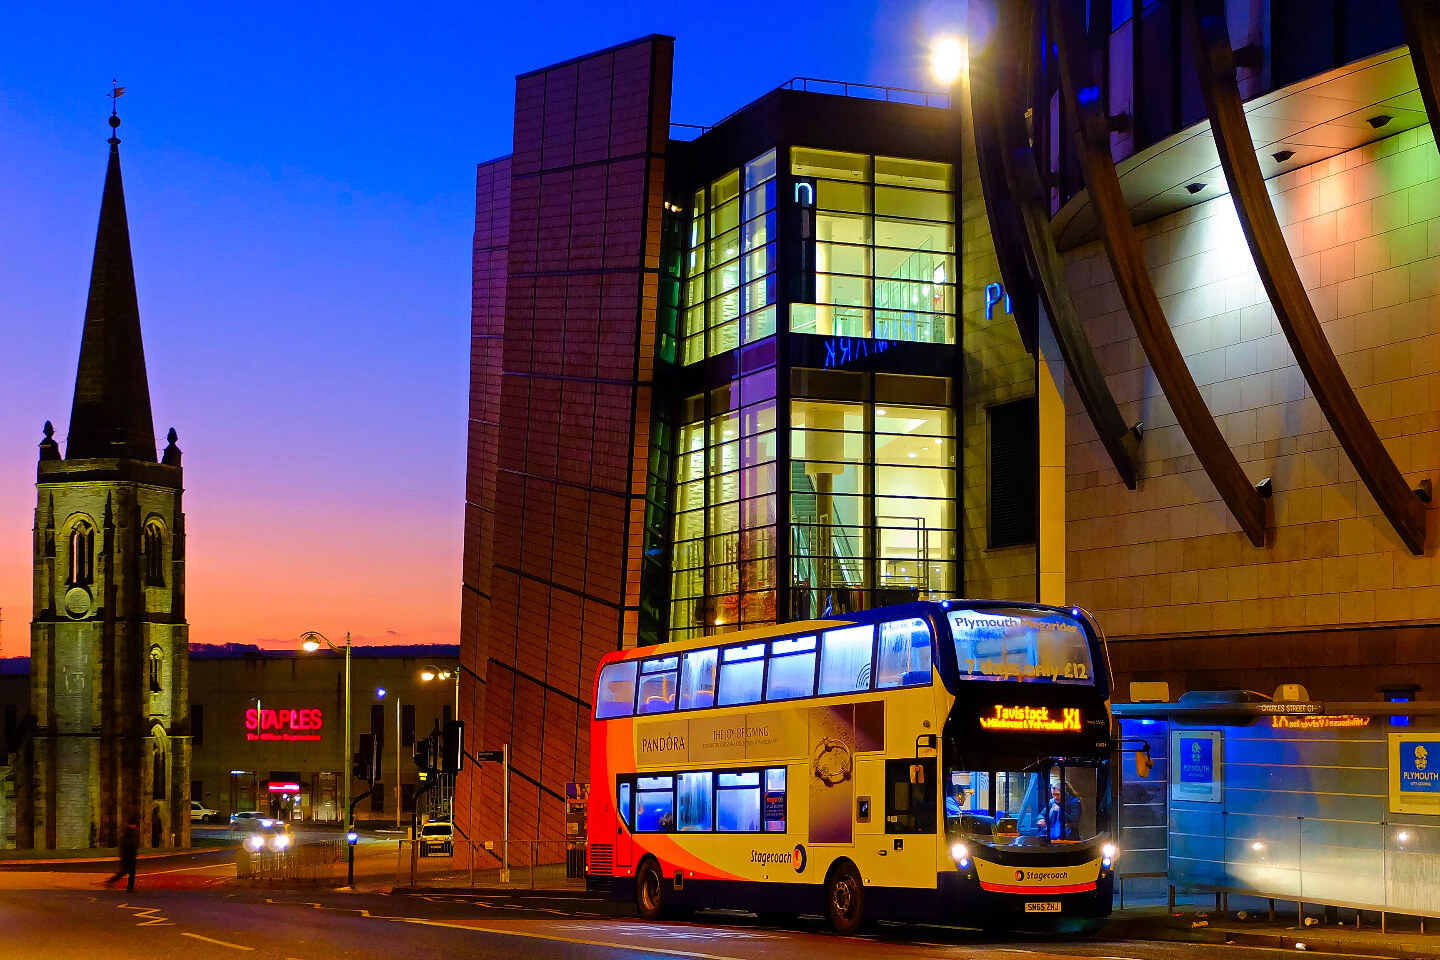 Student Accommodation in Plymouth City Centre, Plymouth - Plymouth bus at night time